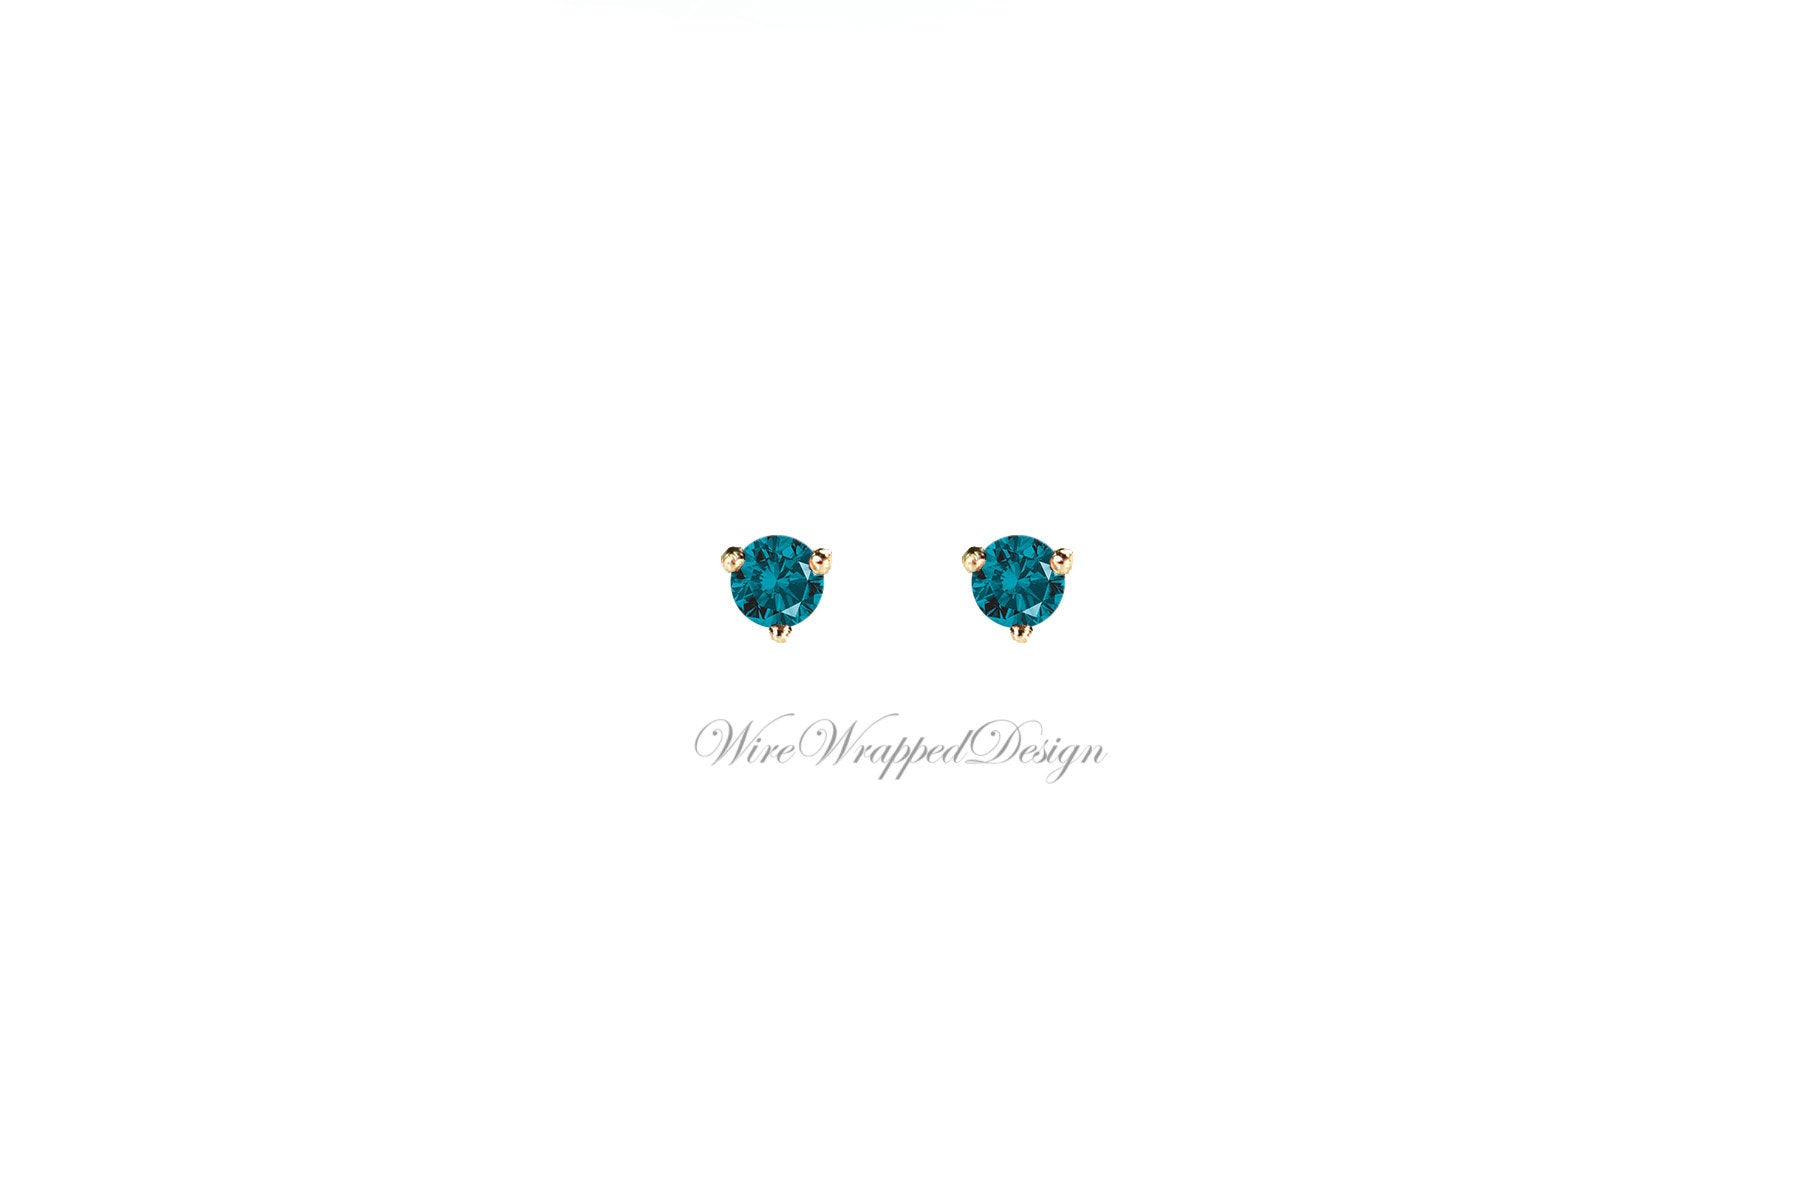 PAIR Genuine Teal BLUE DIAMOND Earrings Studs 2.5mm 0.12tcw Martini 14k Solid Gold (Yellow, Rose, White) Platinum Silver Cartilage Helix